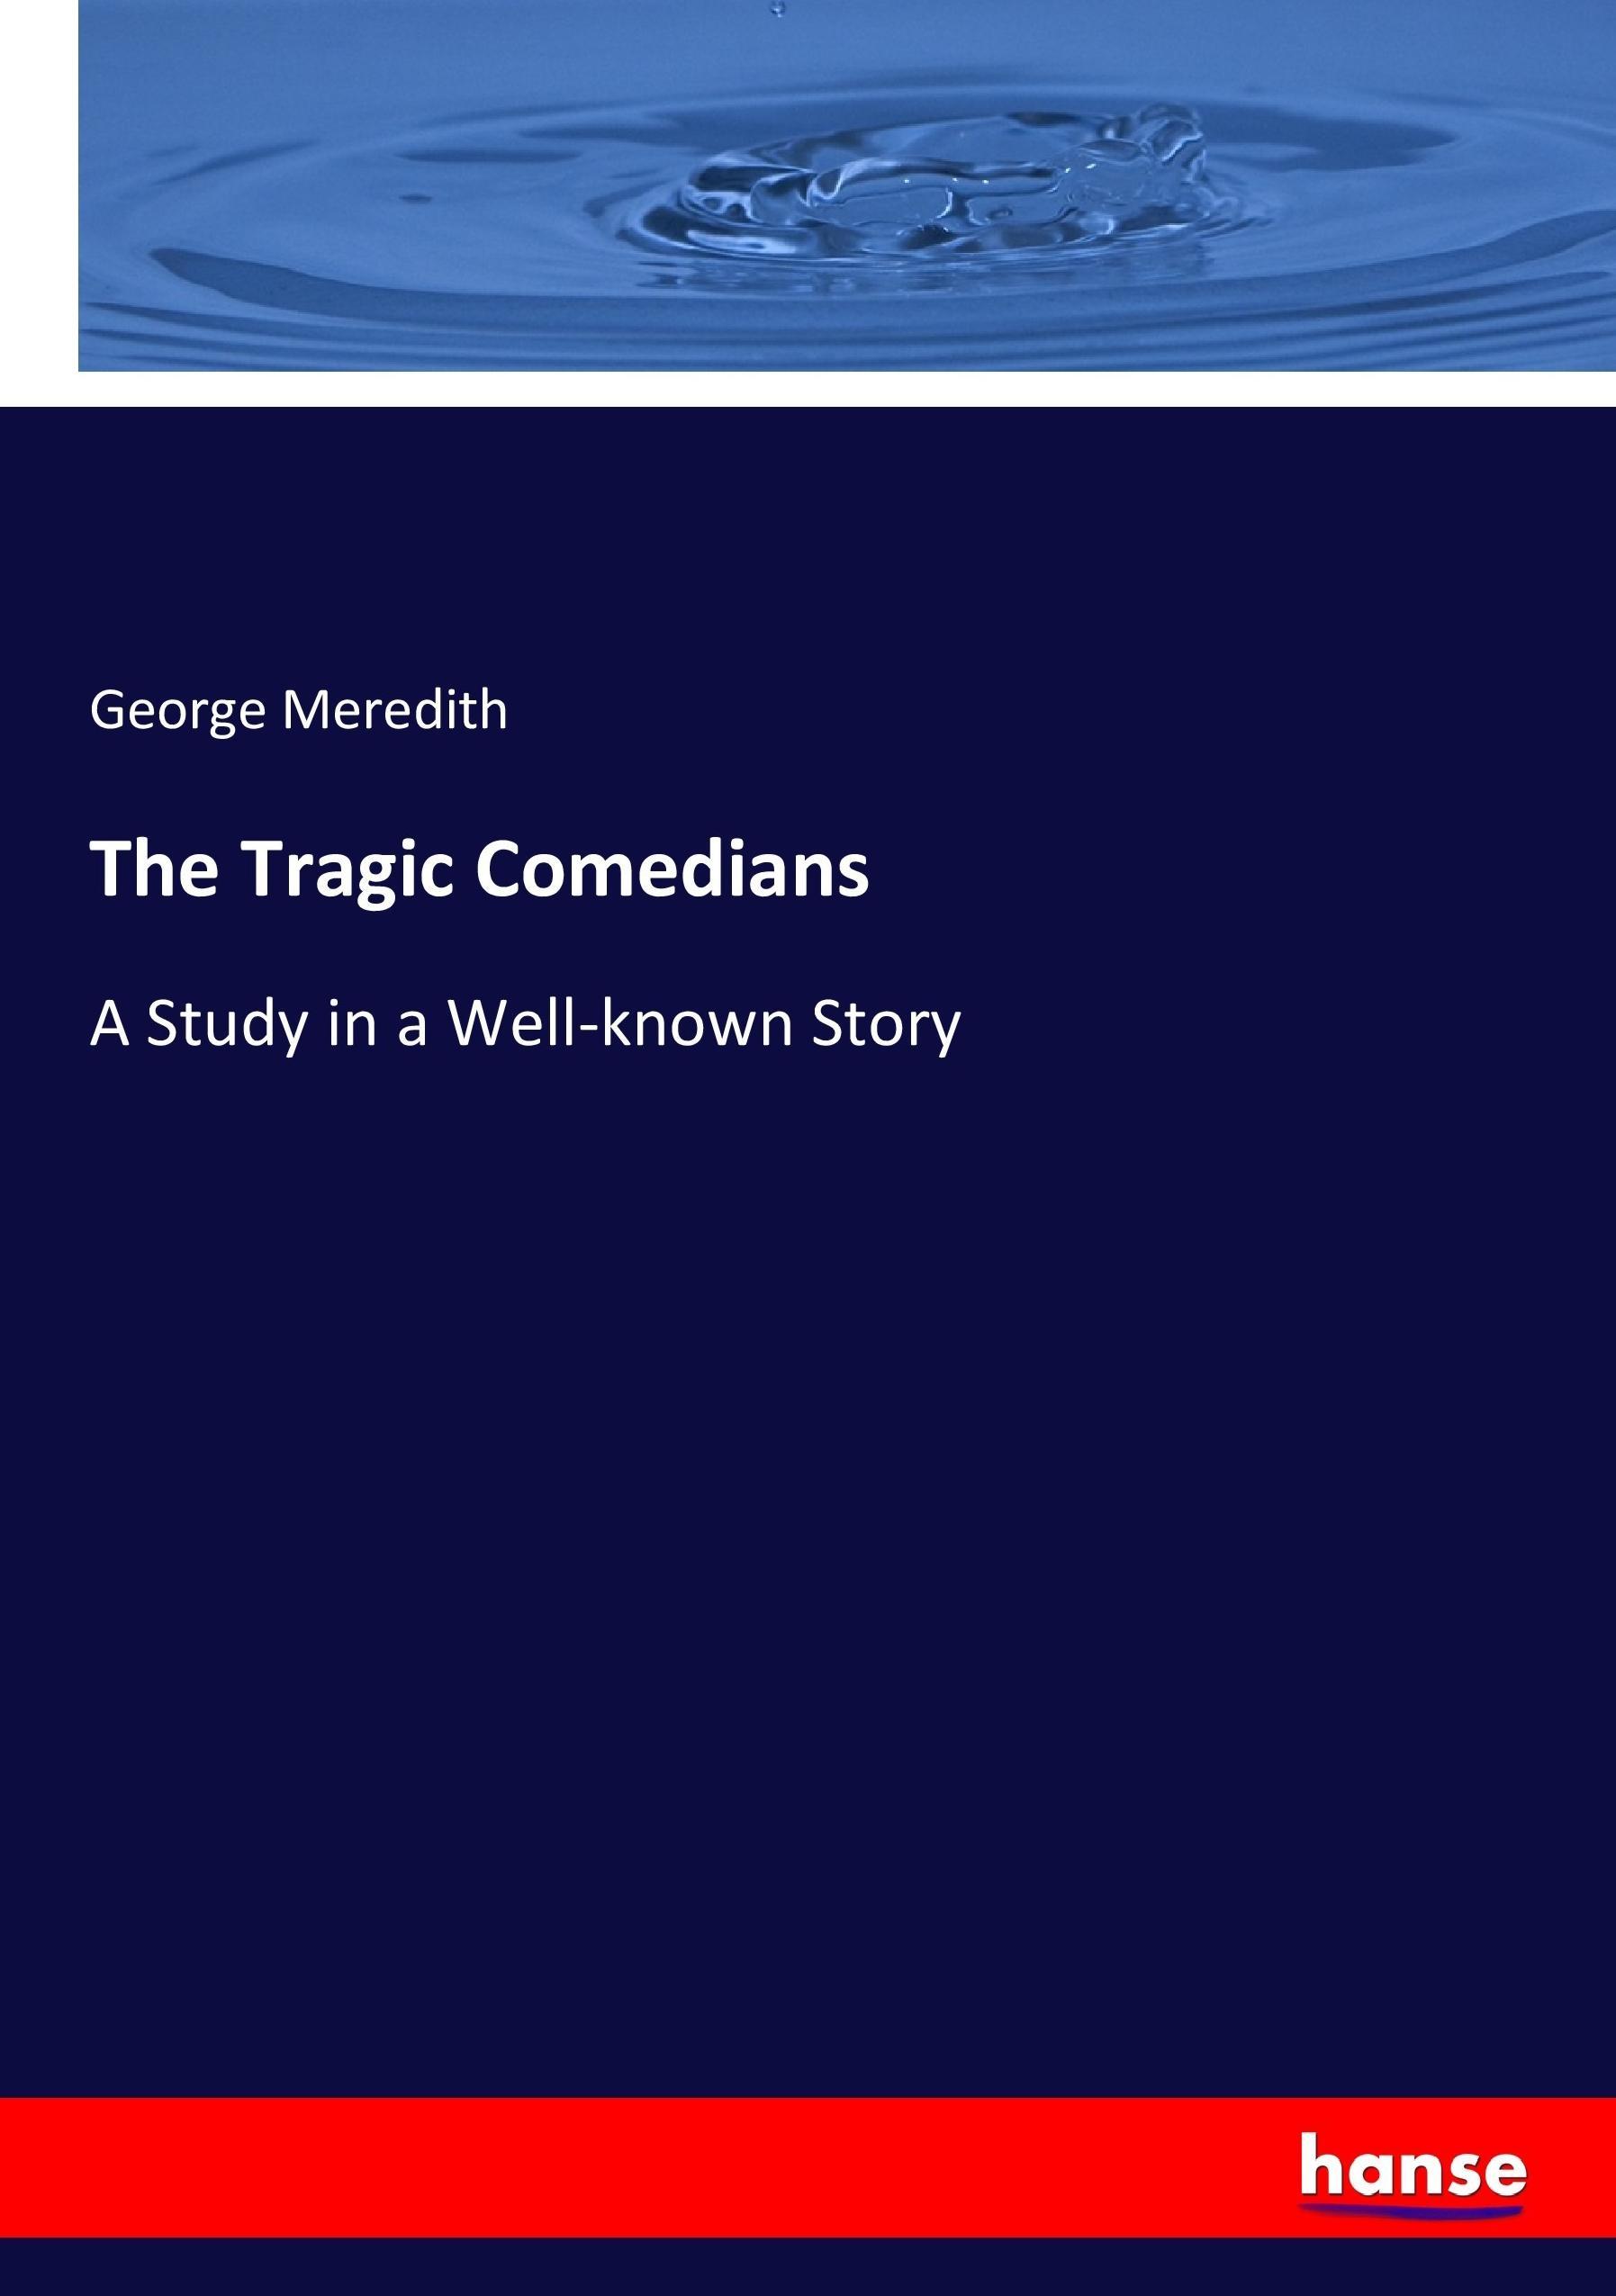 The Tragic Comedians | A Study in a Well-known Story | George Meredith | Taschenbuch | Paperback | 276 S. | Englisch | 2017 | hansebooks | EAN 9783744779029 - Meredith, George